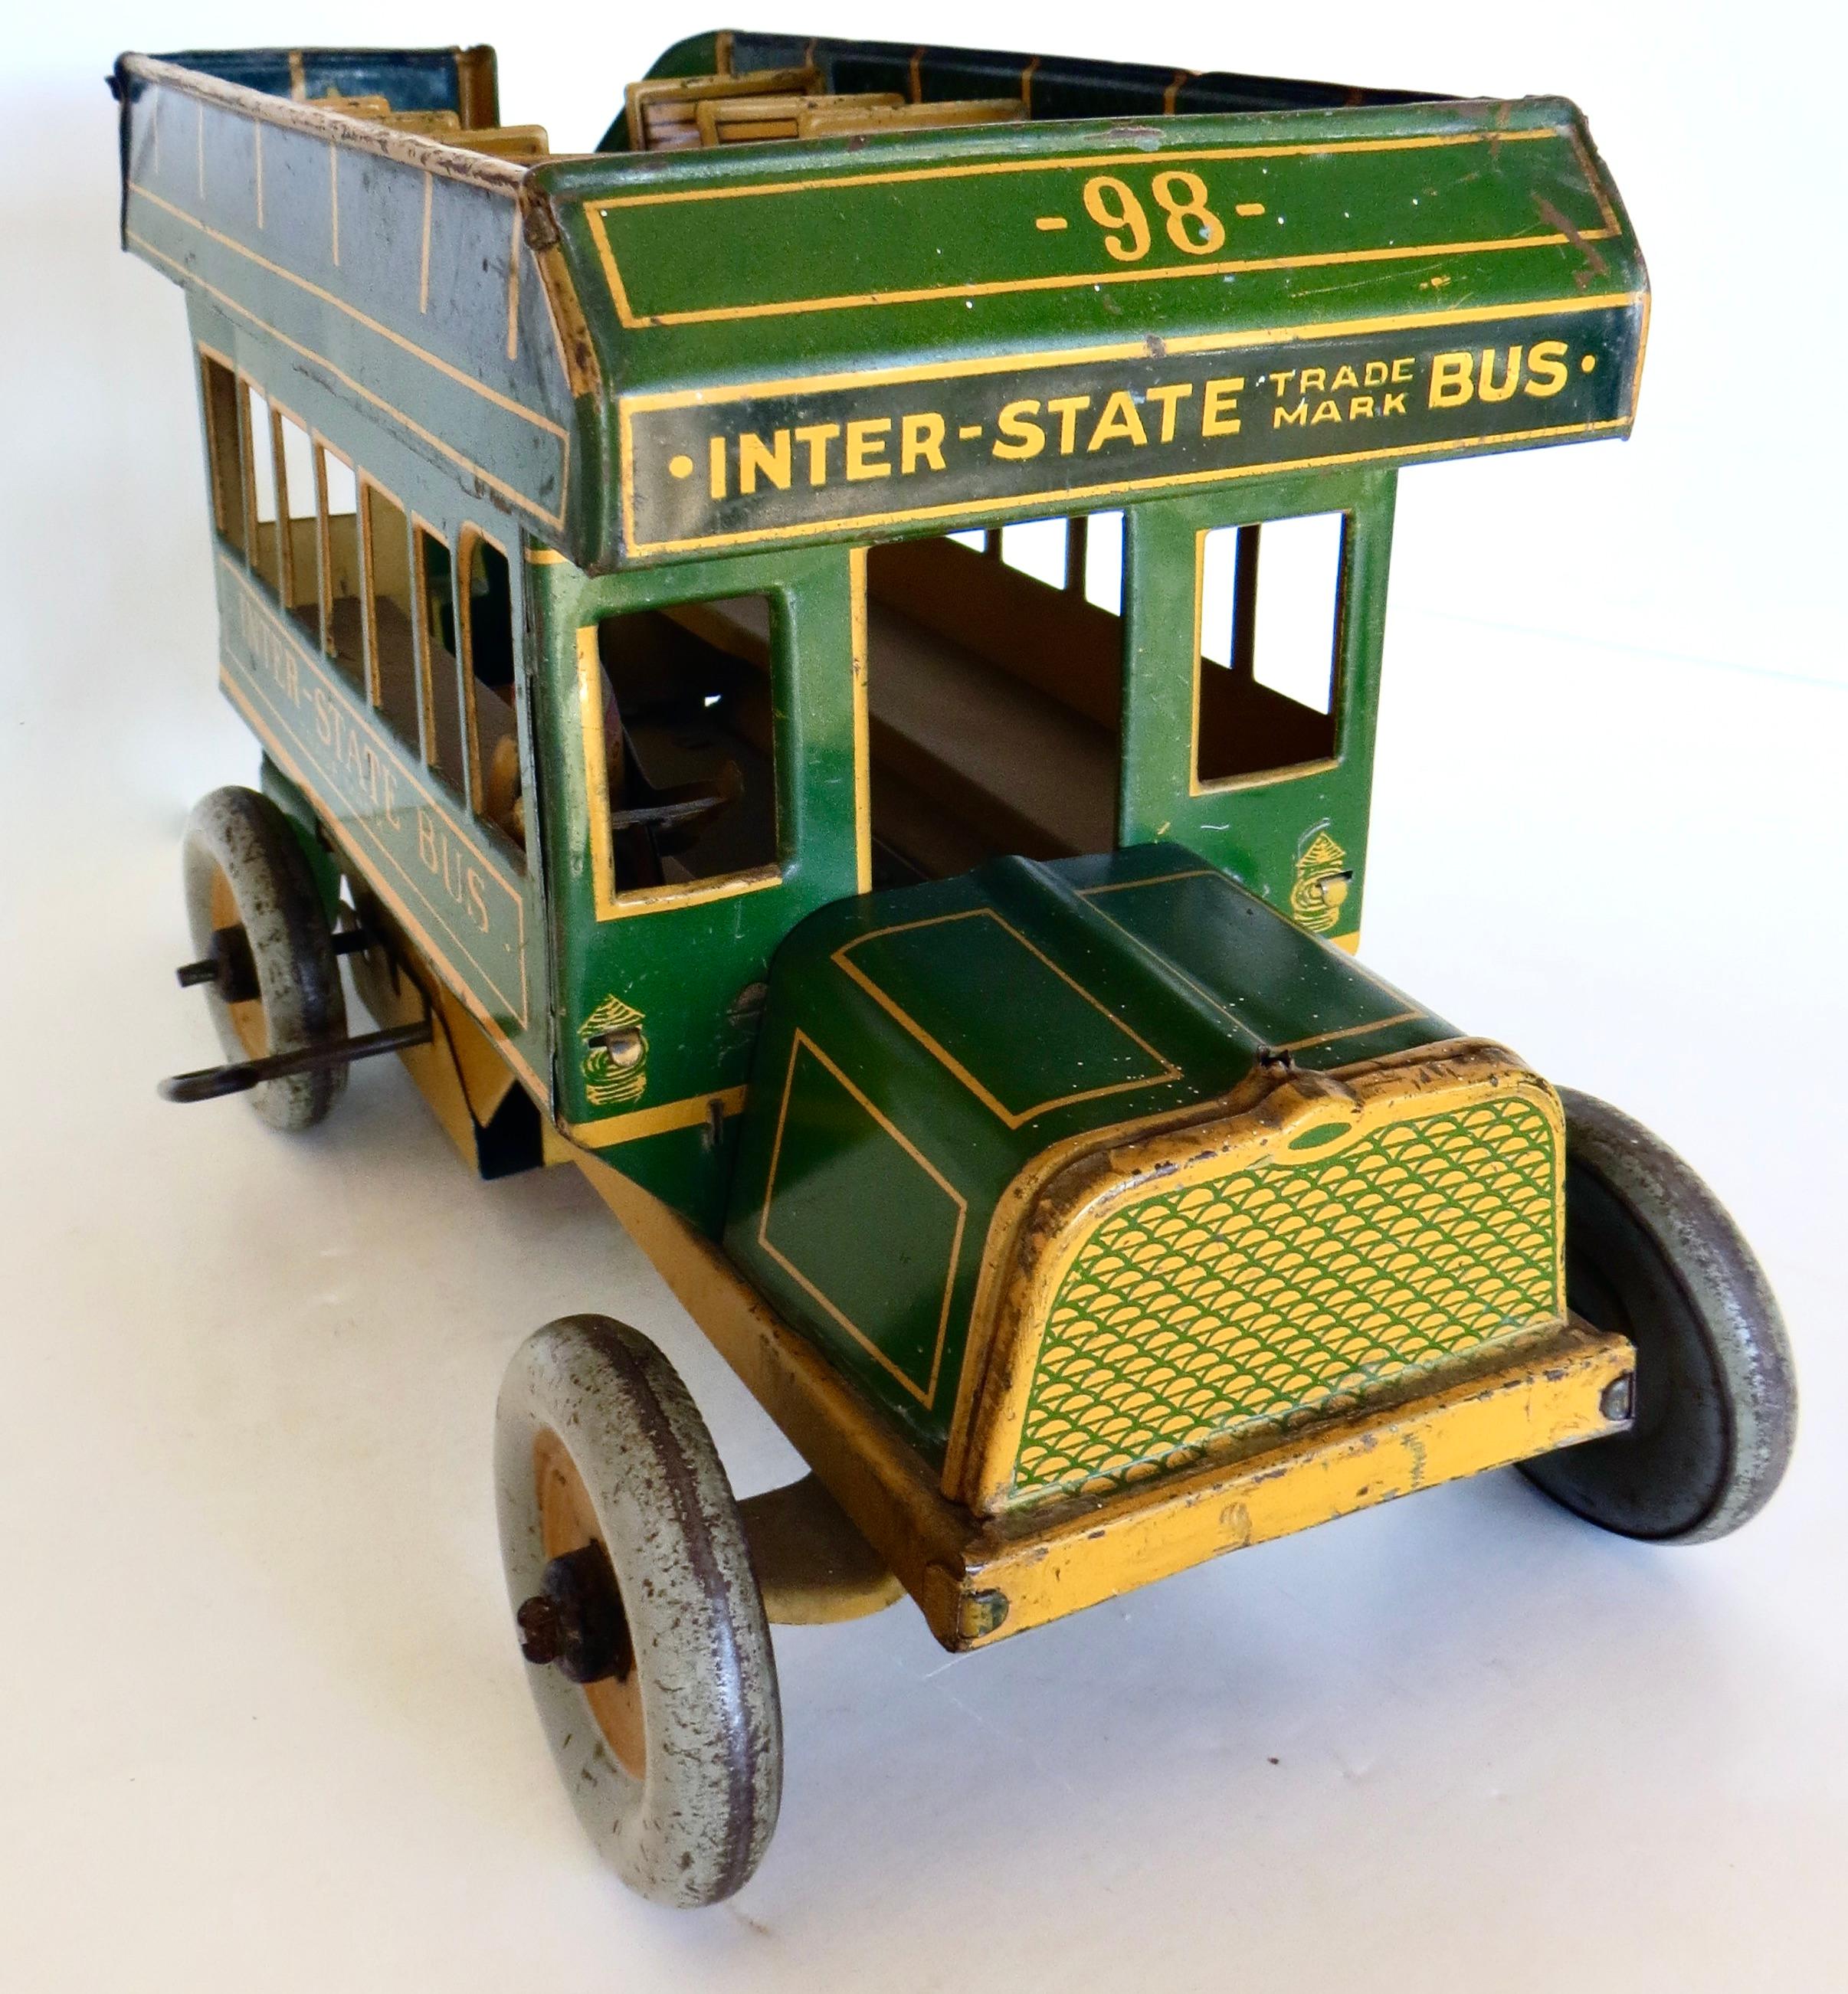 Antique Wind-Up Double Decker open air bus by the Ferdinand Strauss Toy Company, New York; circa 1925; is quite a large and substantial toy resembling very closely, buses of that era. 
Ferdinand Strauss was a German toy maker who started his company